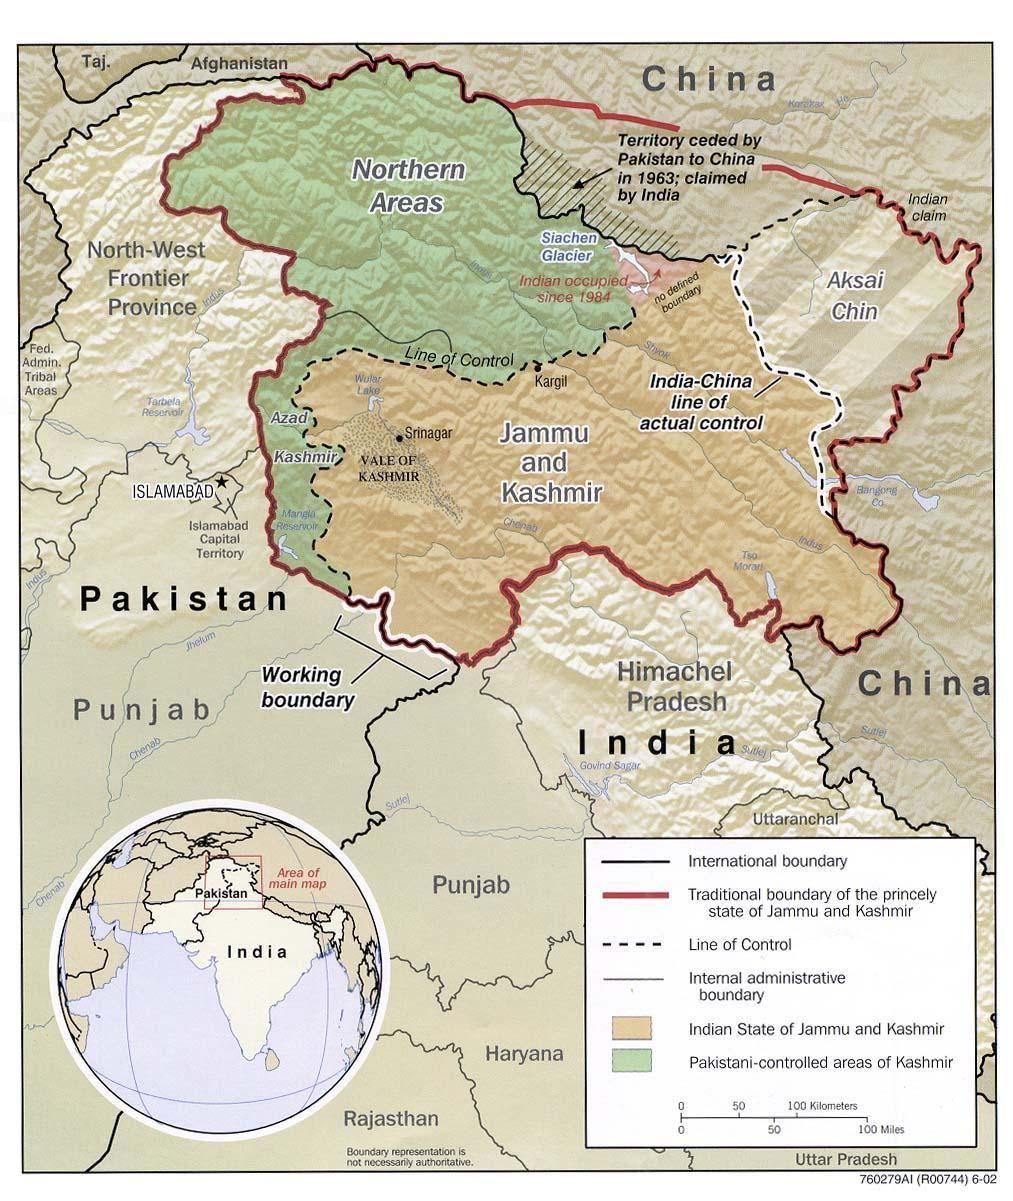 ICG Asia Report N 79, 24 June 2004 Page 30 APPENDIX A MAP OF KASHMIR